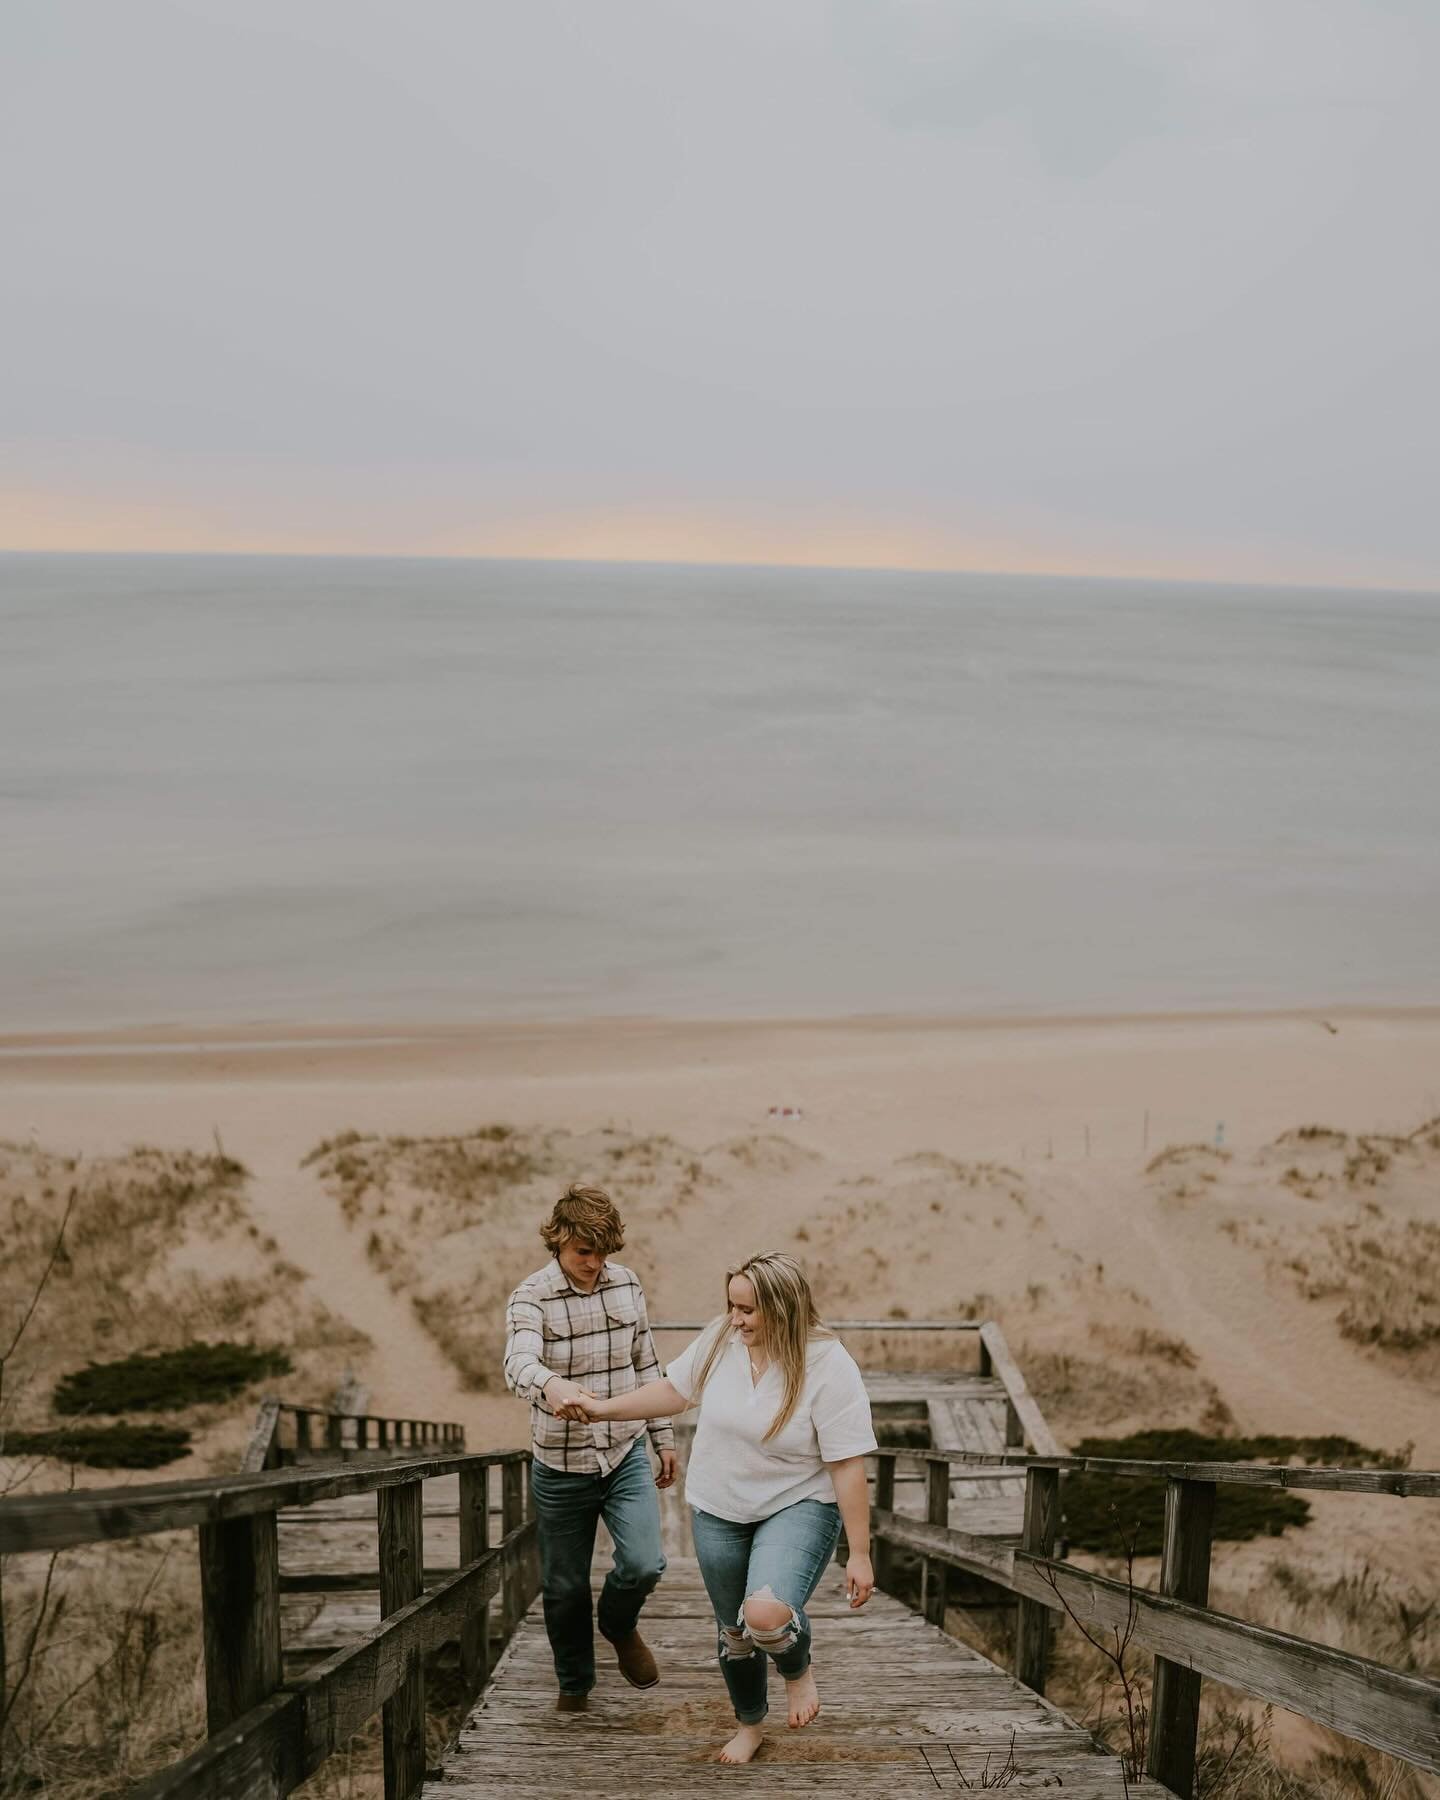 Paige and Joel braved the crazy (all over the place) April weather to run around on the beach with me. This place was so so beautiful and they absolutely crushed it. Can&rsquo;t wait for their wedding in June! 💕